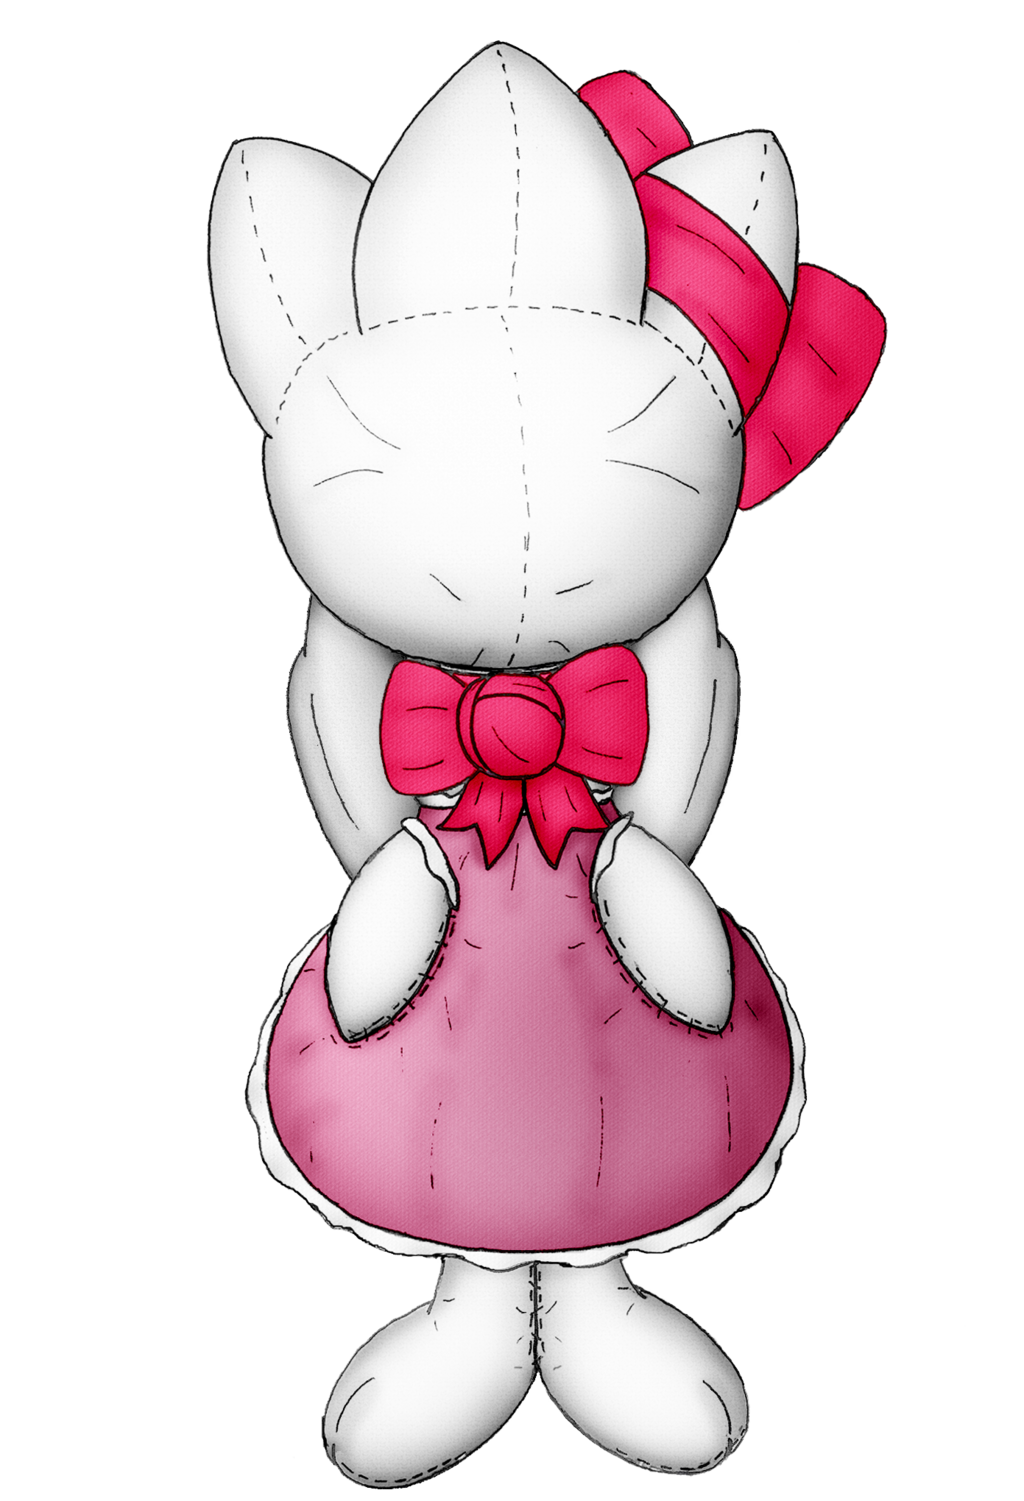 Tiphany La'Belle the Togetic "Doll" (Commission)